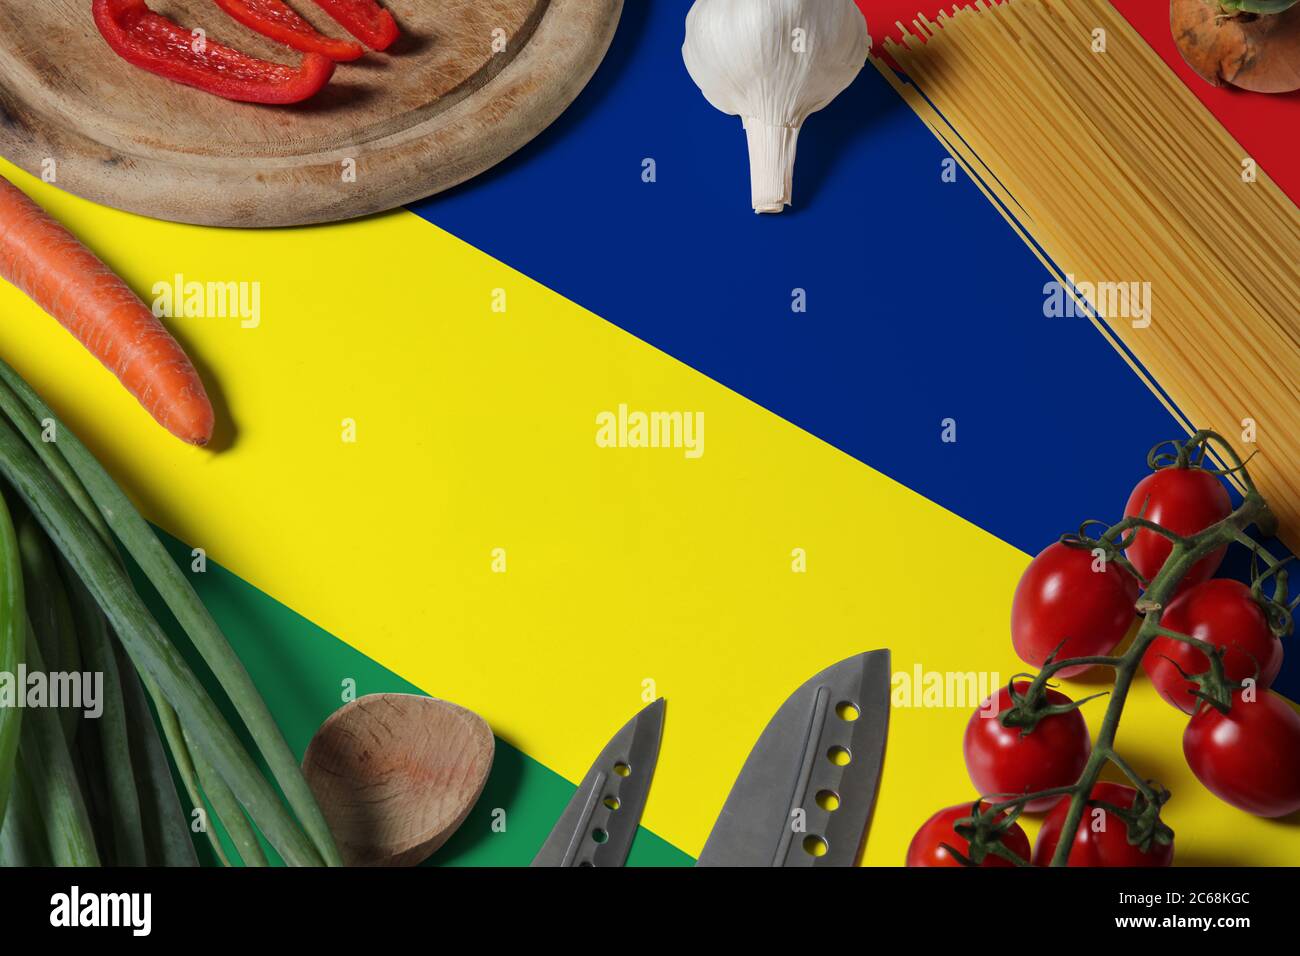 Mauritius flag on fresh vegetables and knife concept wooden table. Cooking concept with preparing background theme. Stock Photo